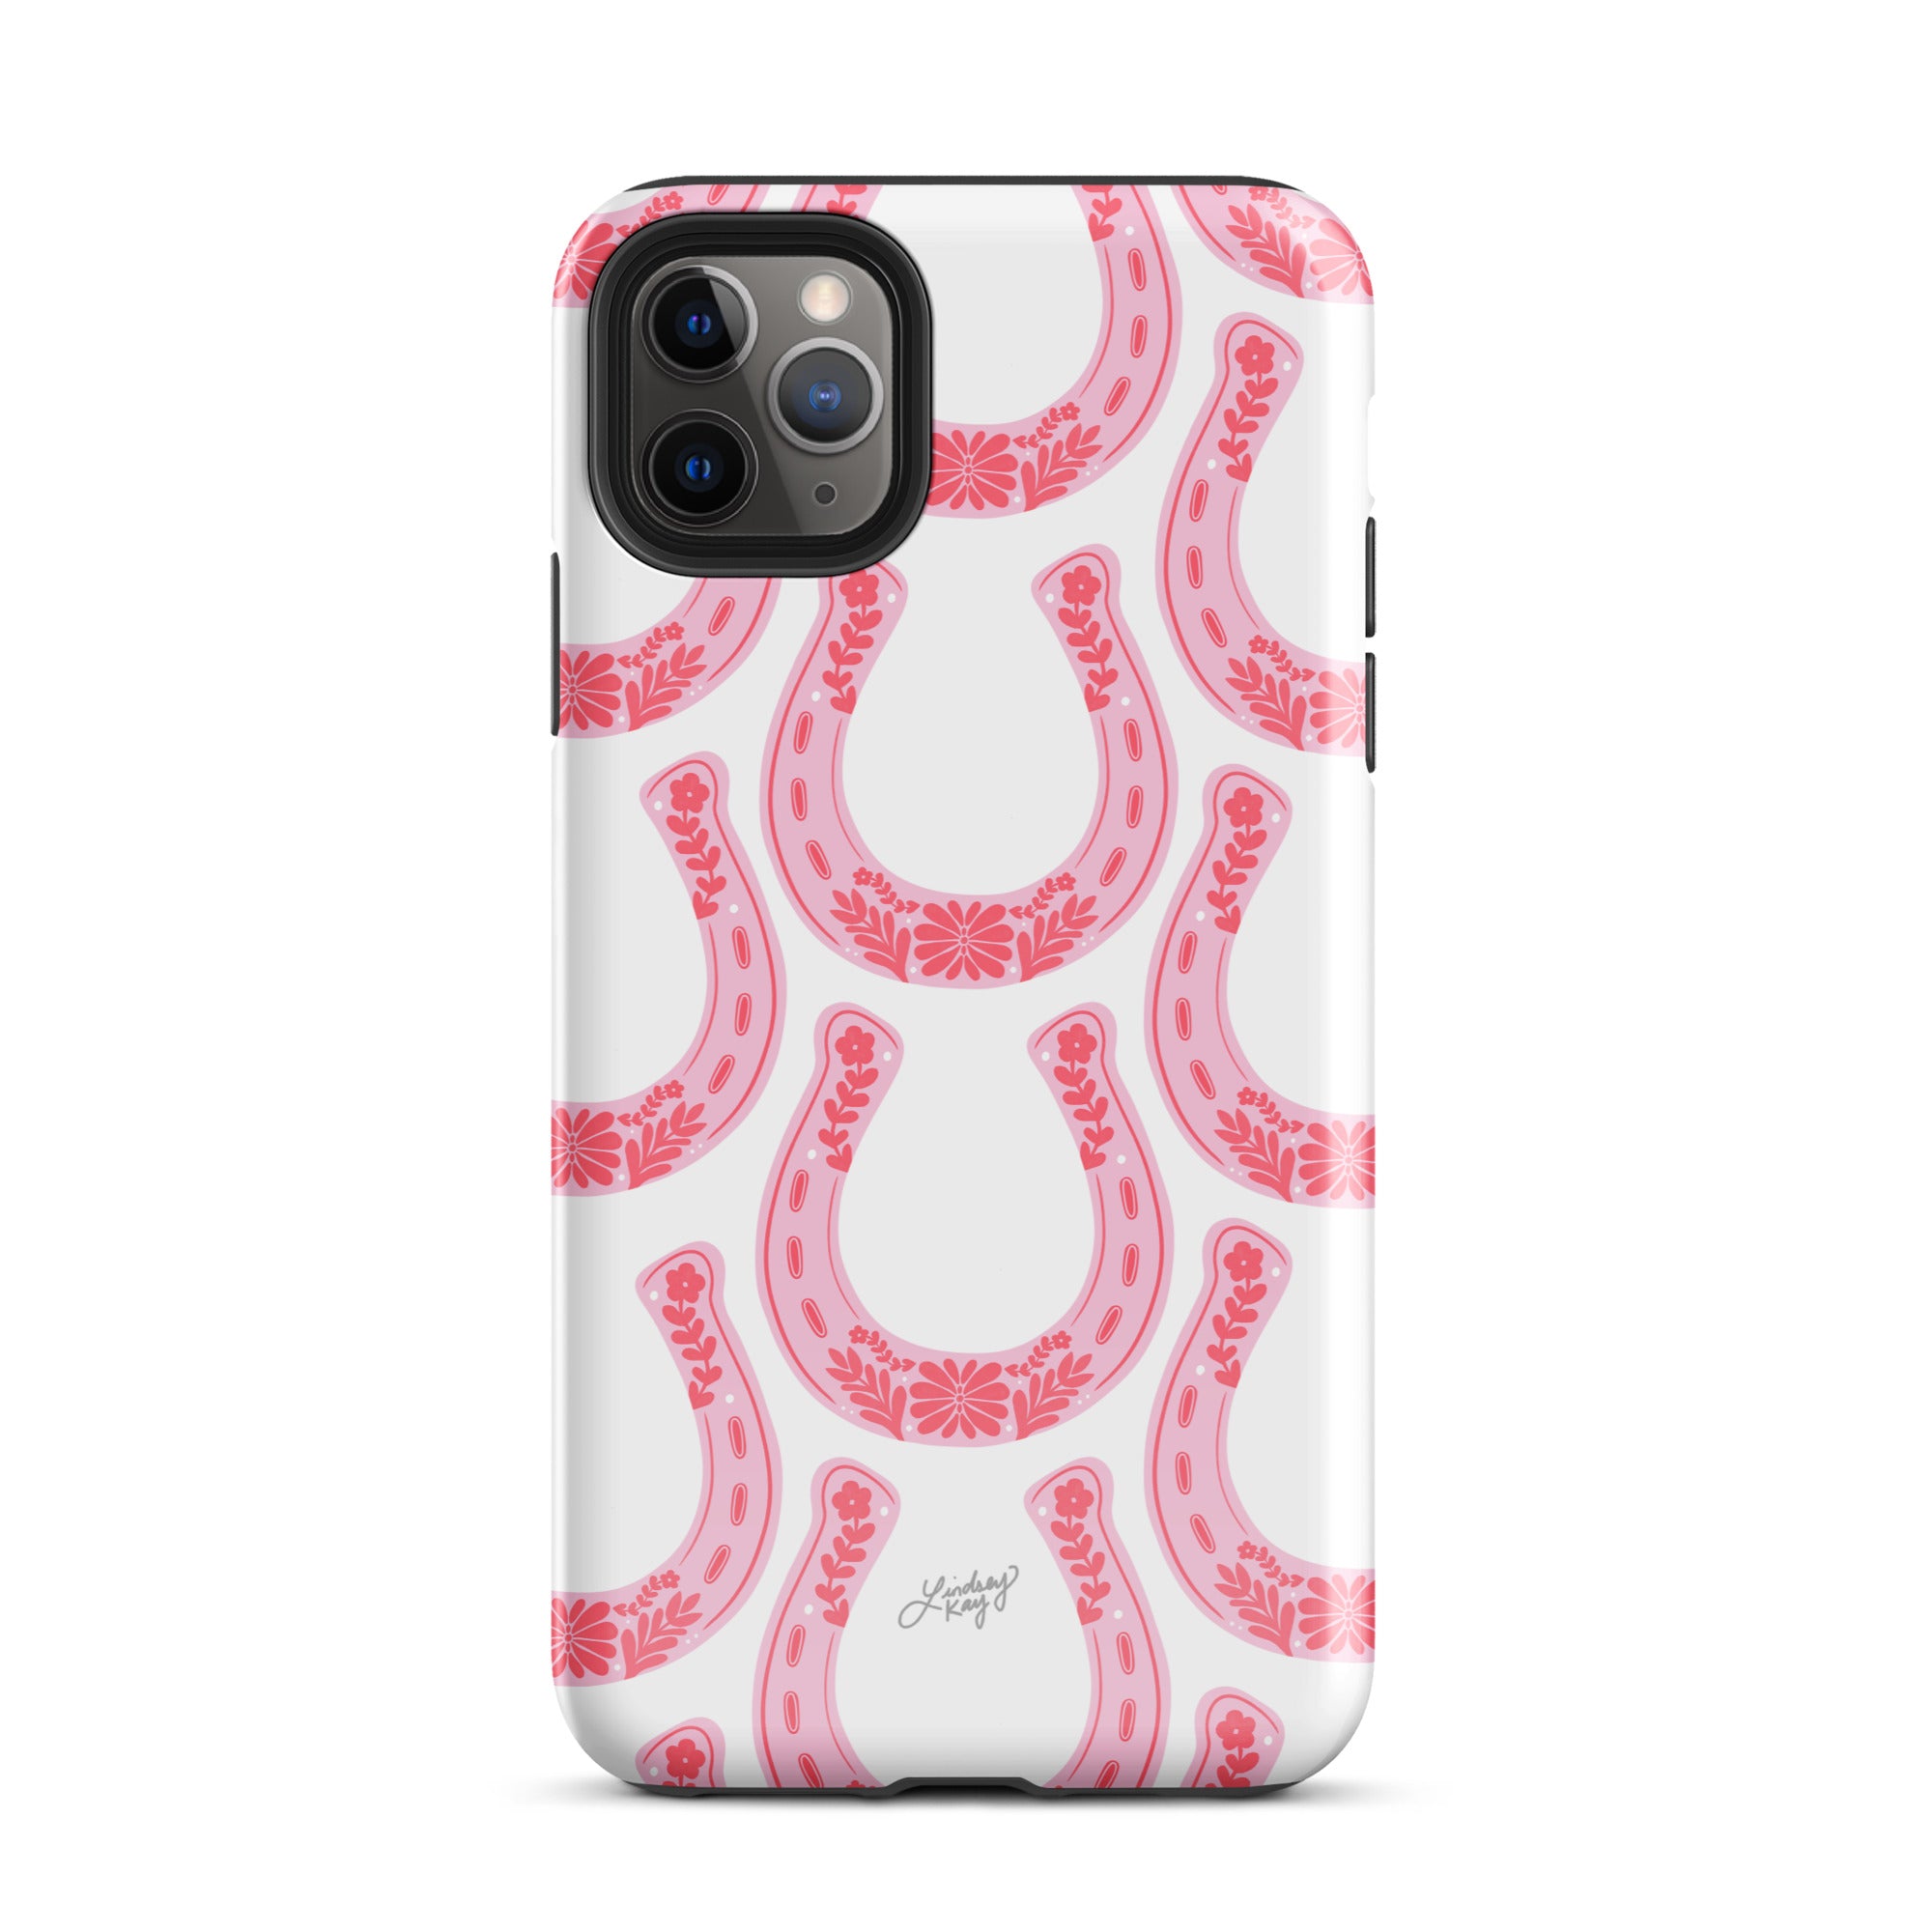 pink horseshoe illustration pattern iphone case cover tough protector country western cute texas sorority